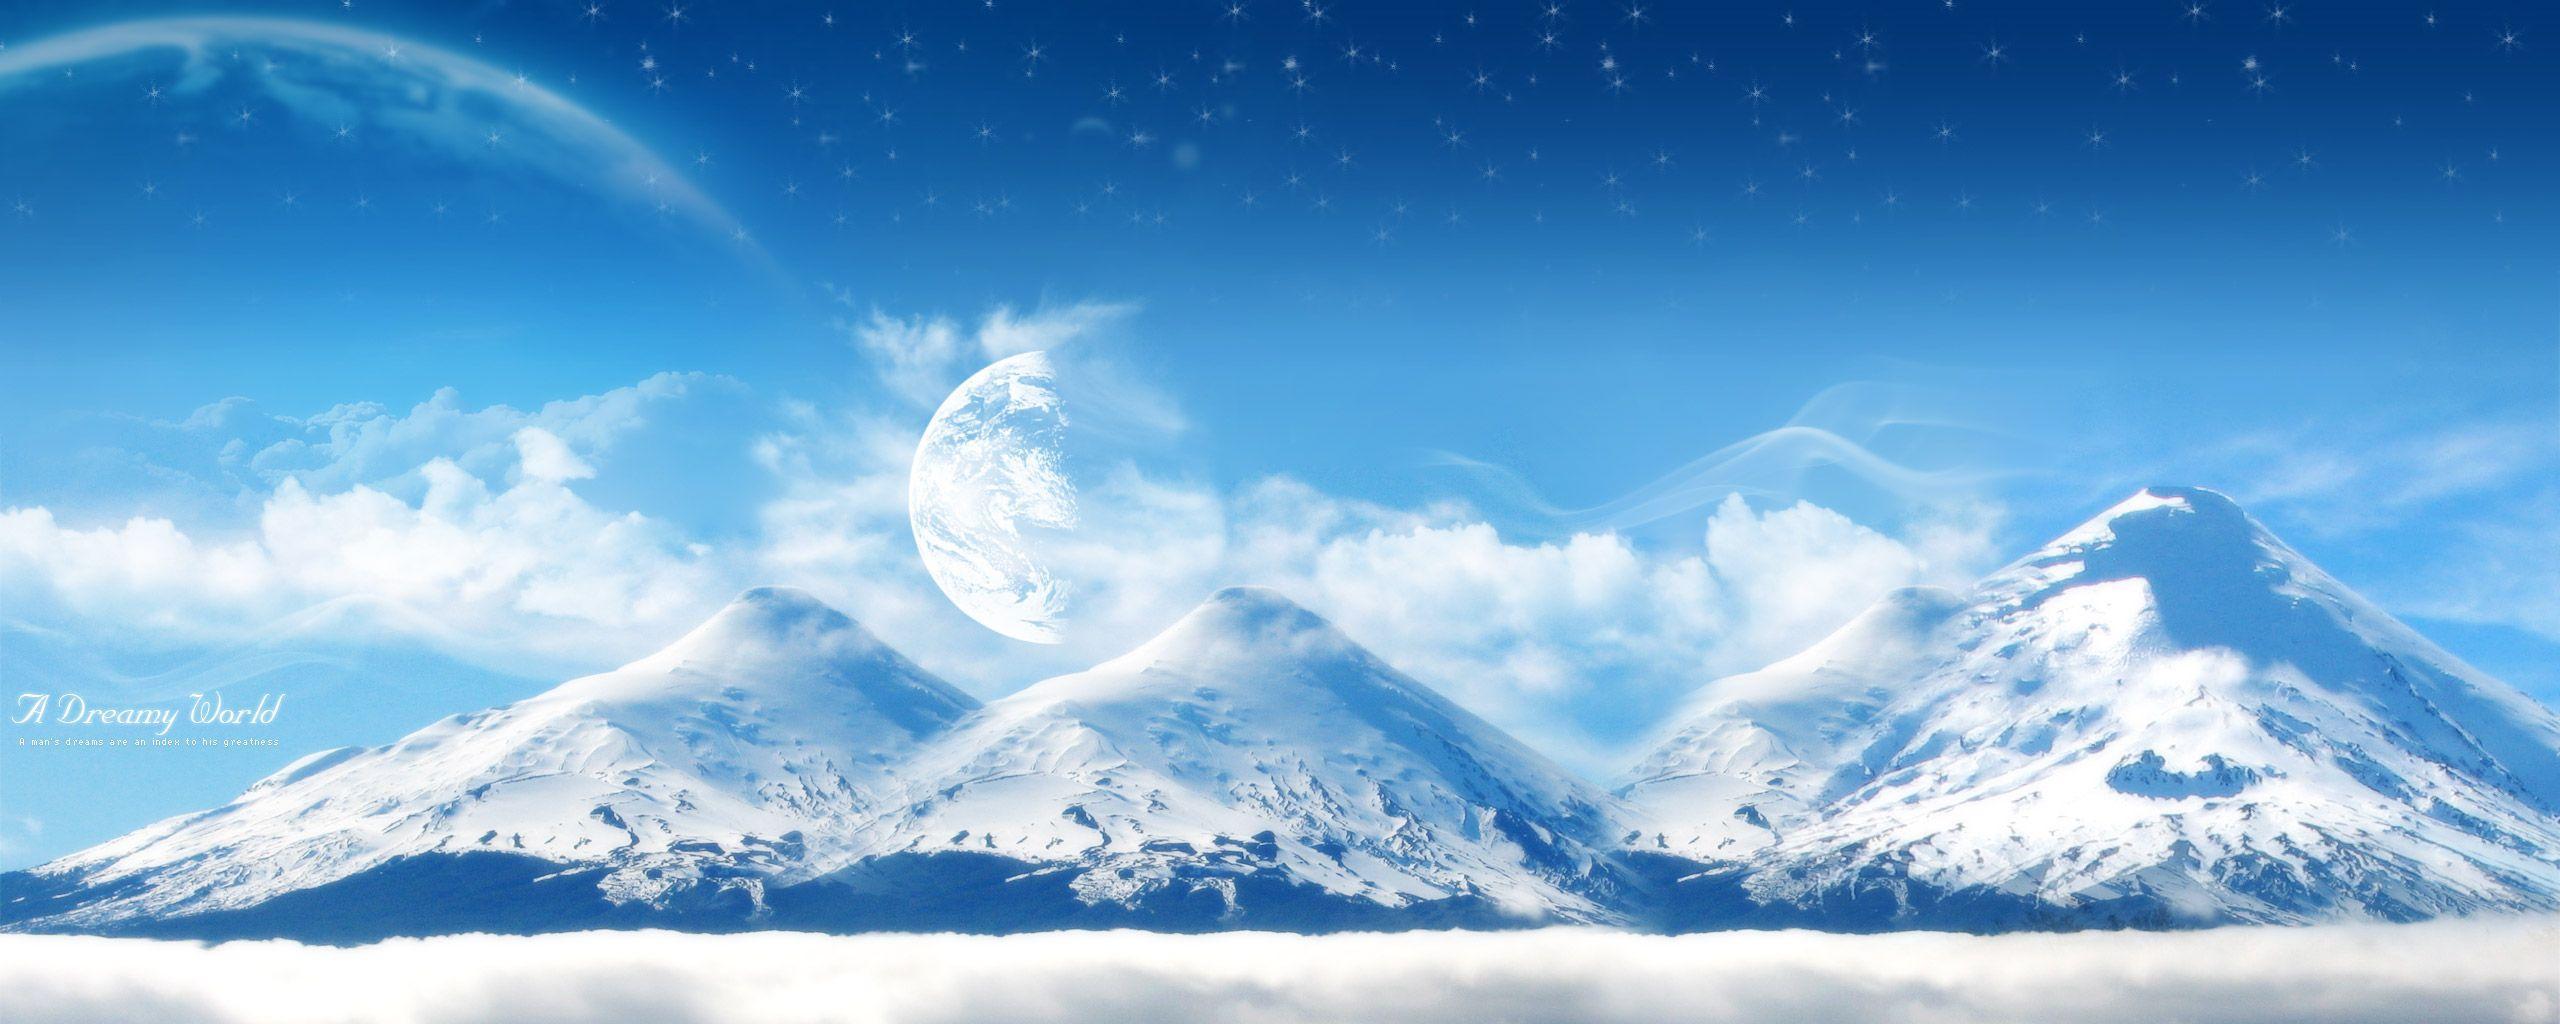 Free download Anime Landscape HD Wallpapers DOWNLOAD Anime Landscape HD  Wallpapers 1704x1047 for your Desktop Mobile  Tablet  Explore 43 Anime  Scenery Wallpaper  Background Scenery Scenery Wallpaper Christmas  Scenery Wallpapers